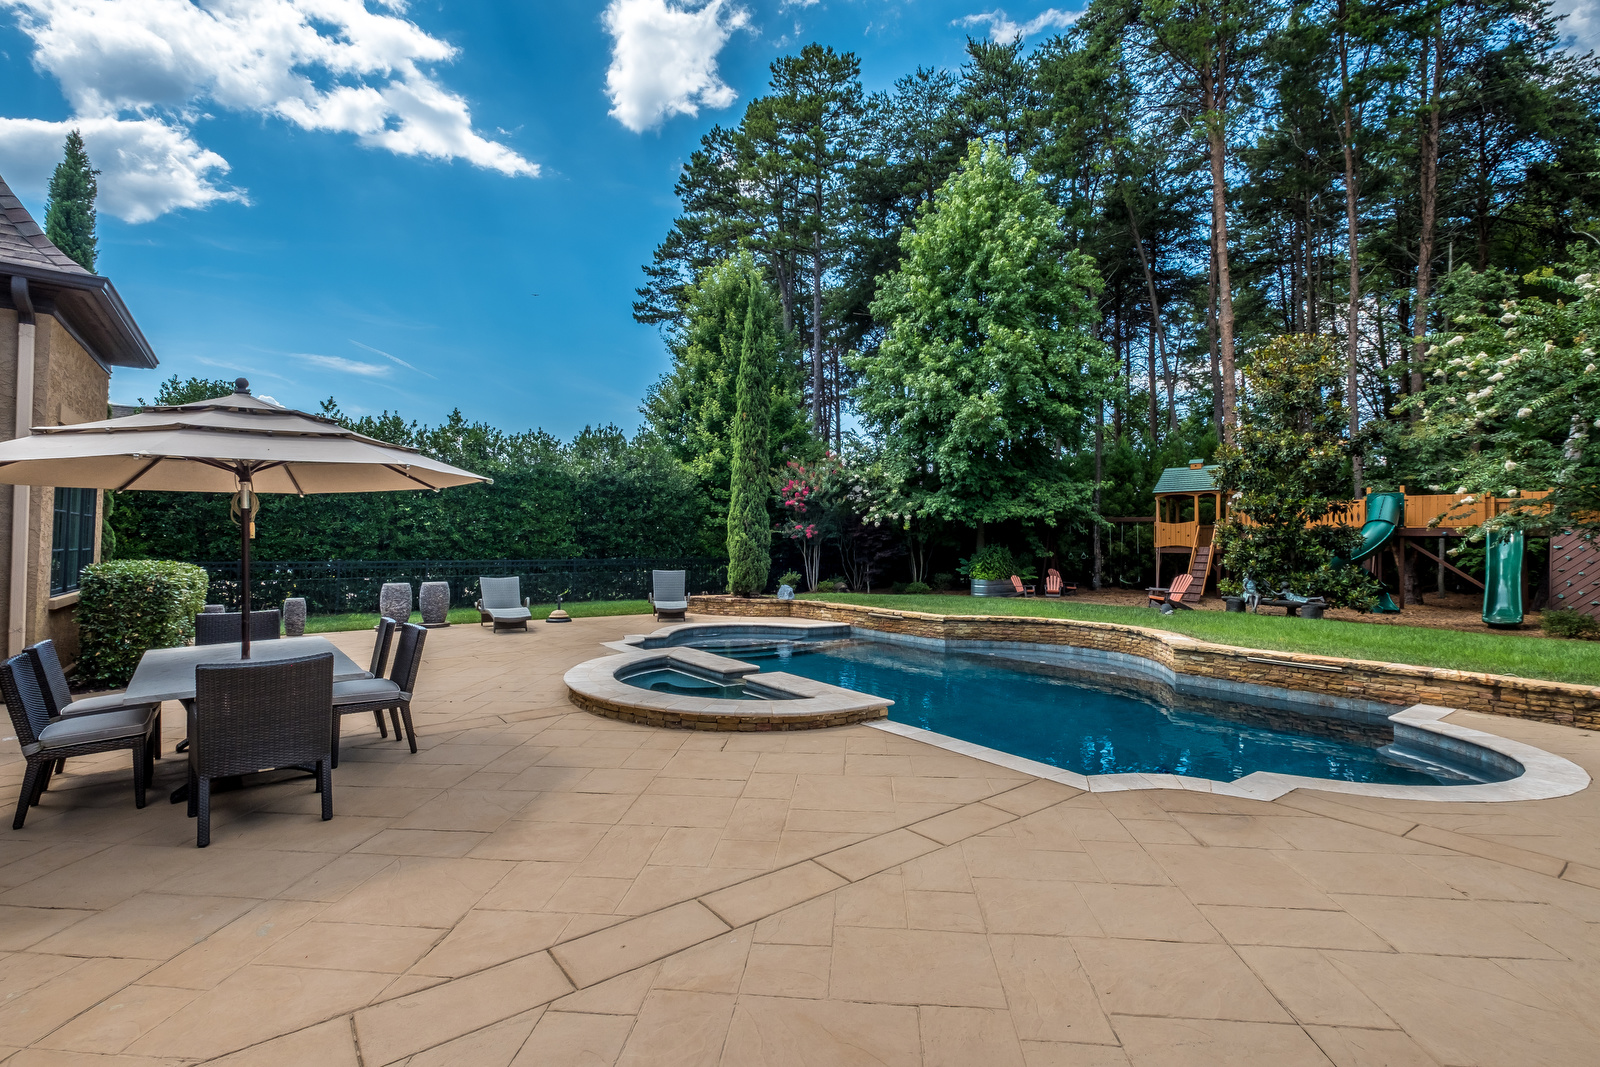 Backyard with built in pool playground in background eating area and manicured trees